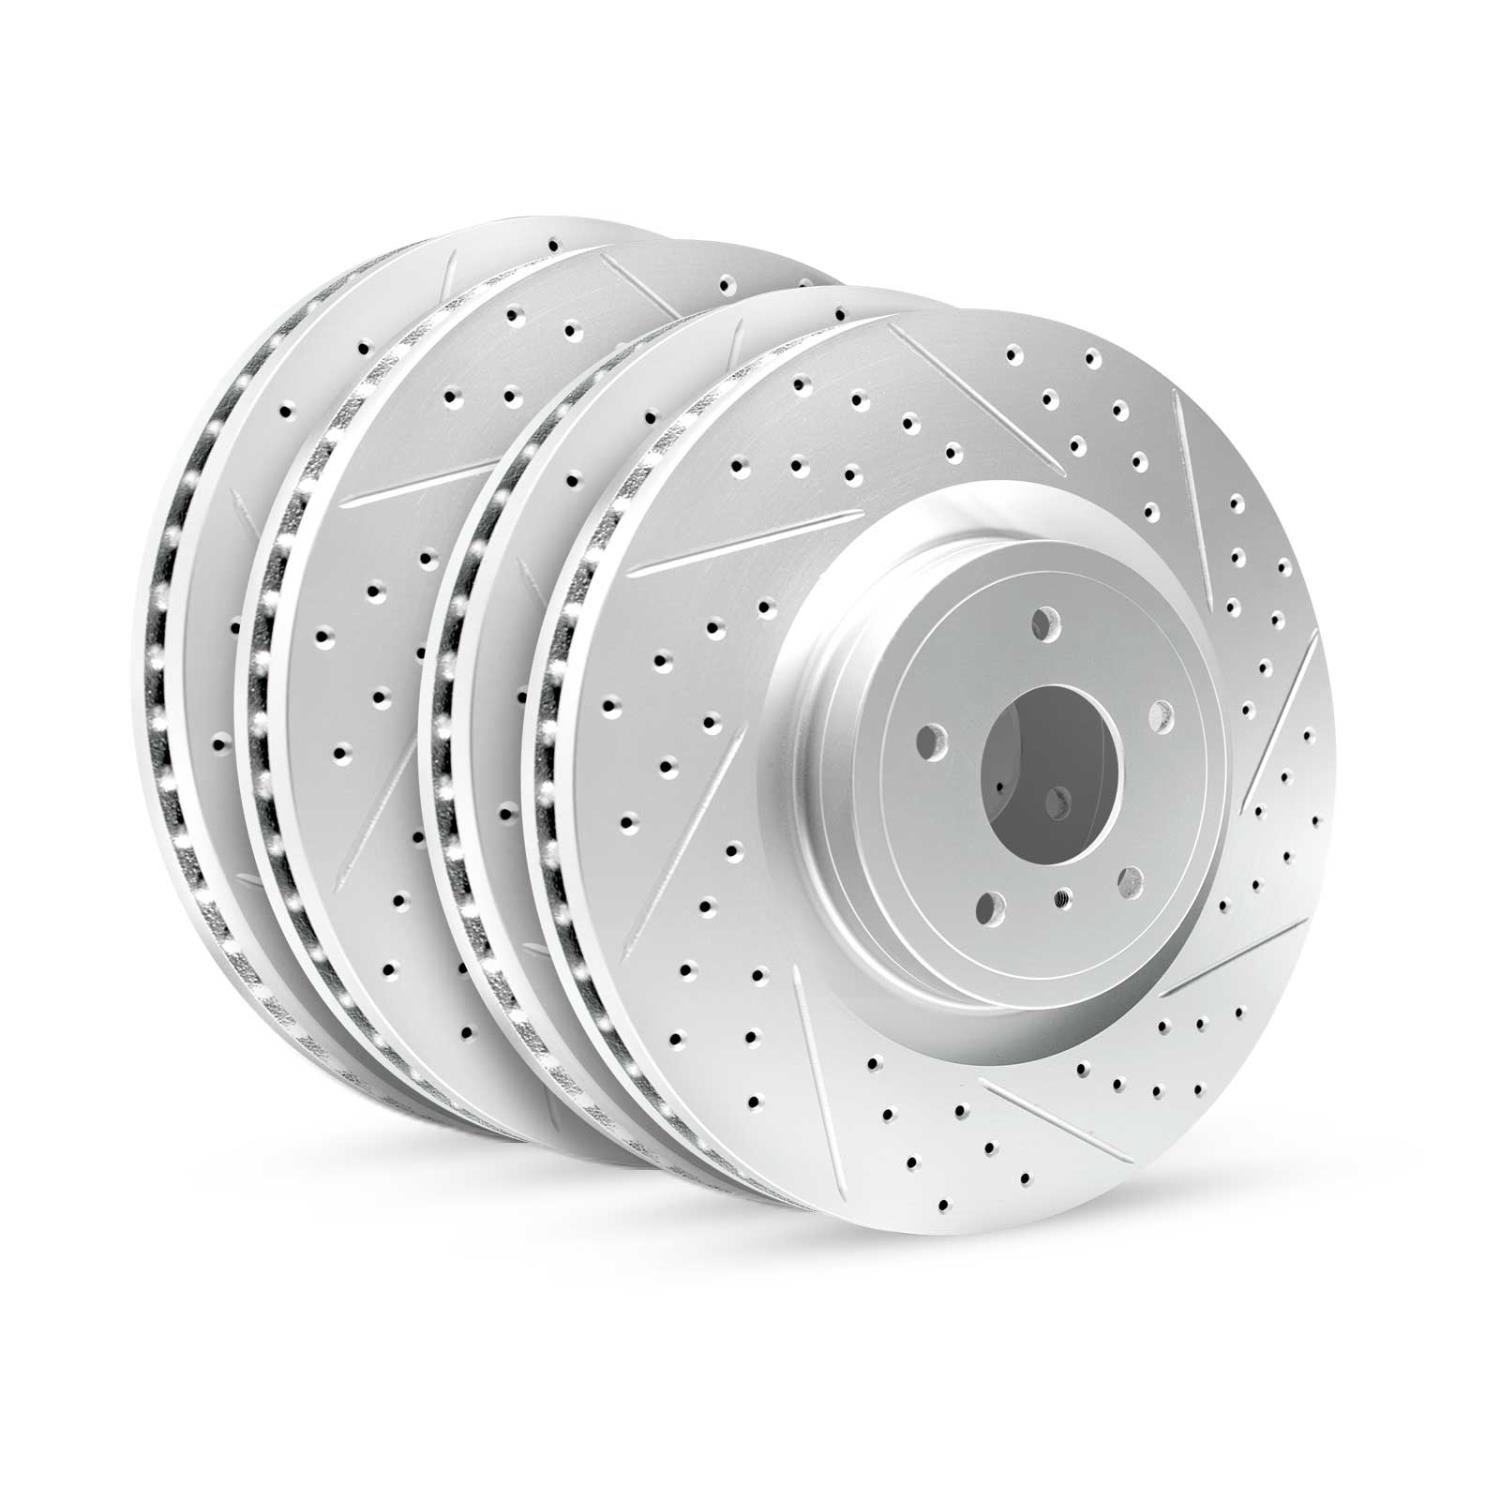 GEO-Carbon Drilled/Slotted Rotors, 2017-2019 Ford/Mazda,